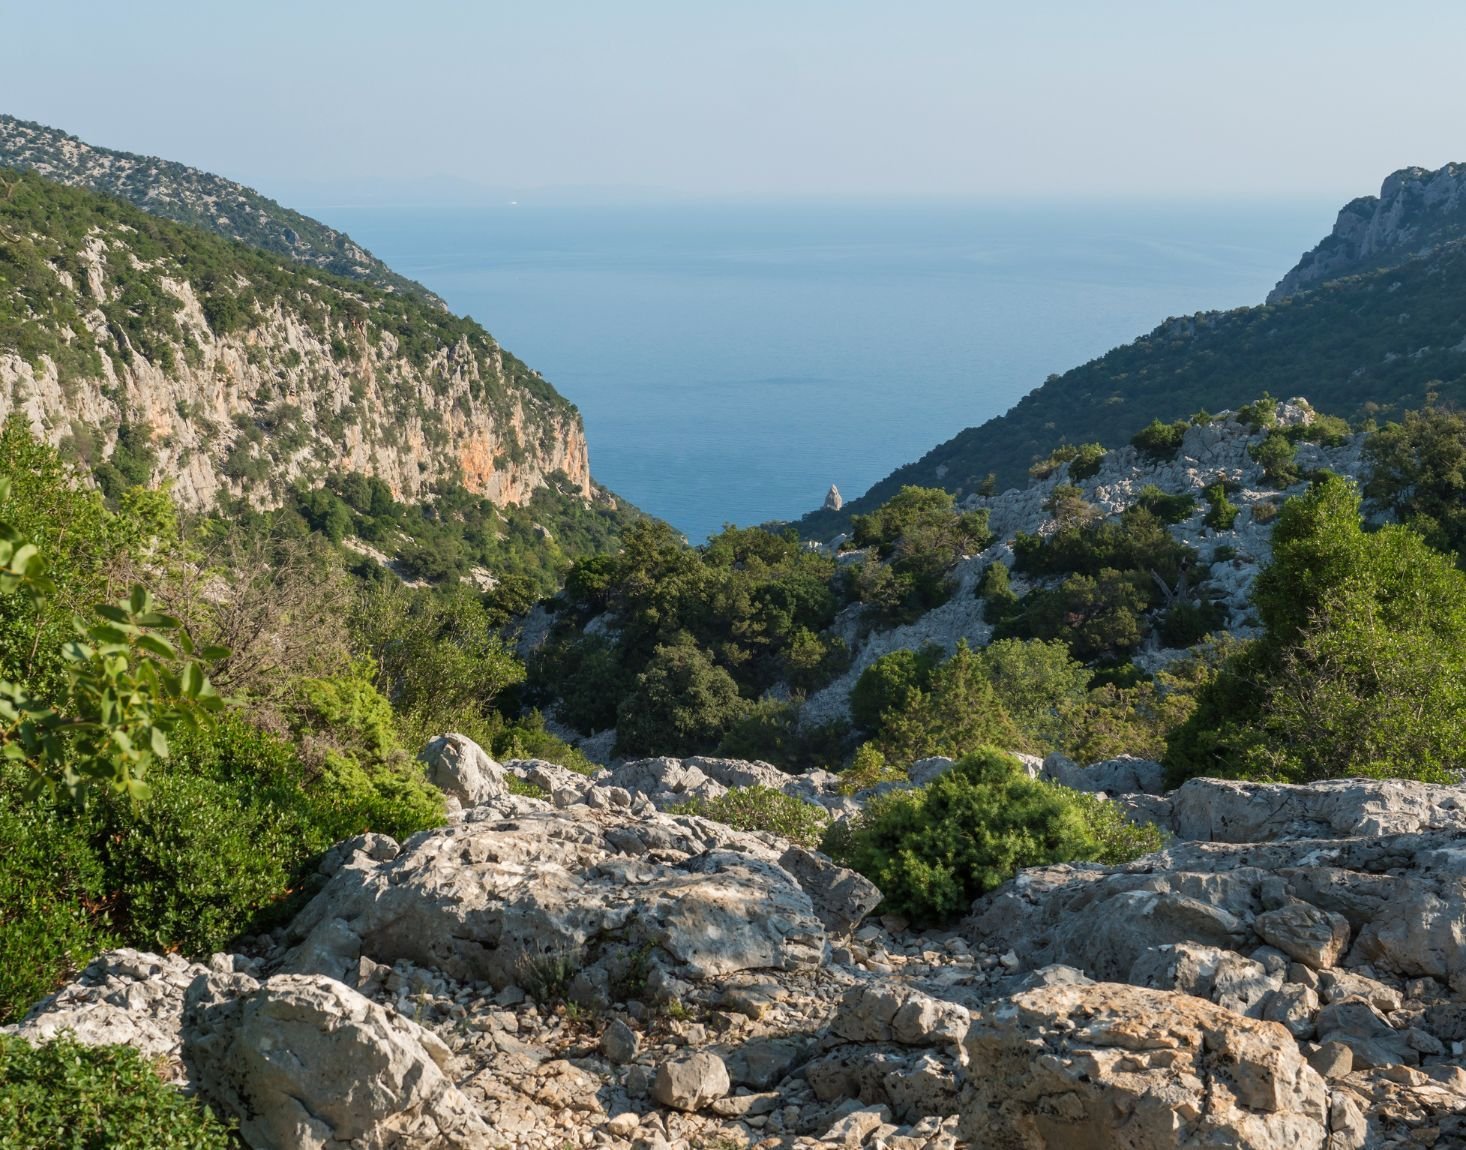 A view of a rocky, green valley with a hiking path to Cala Goloritze beach in Sardinia. Photo: Getty